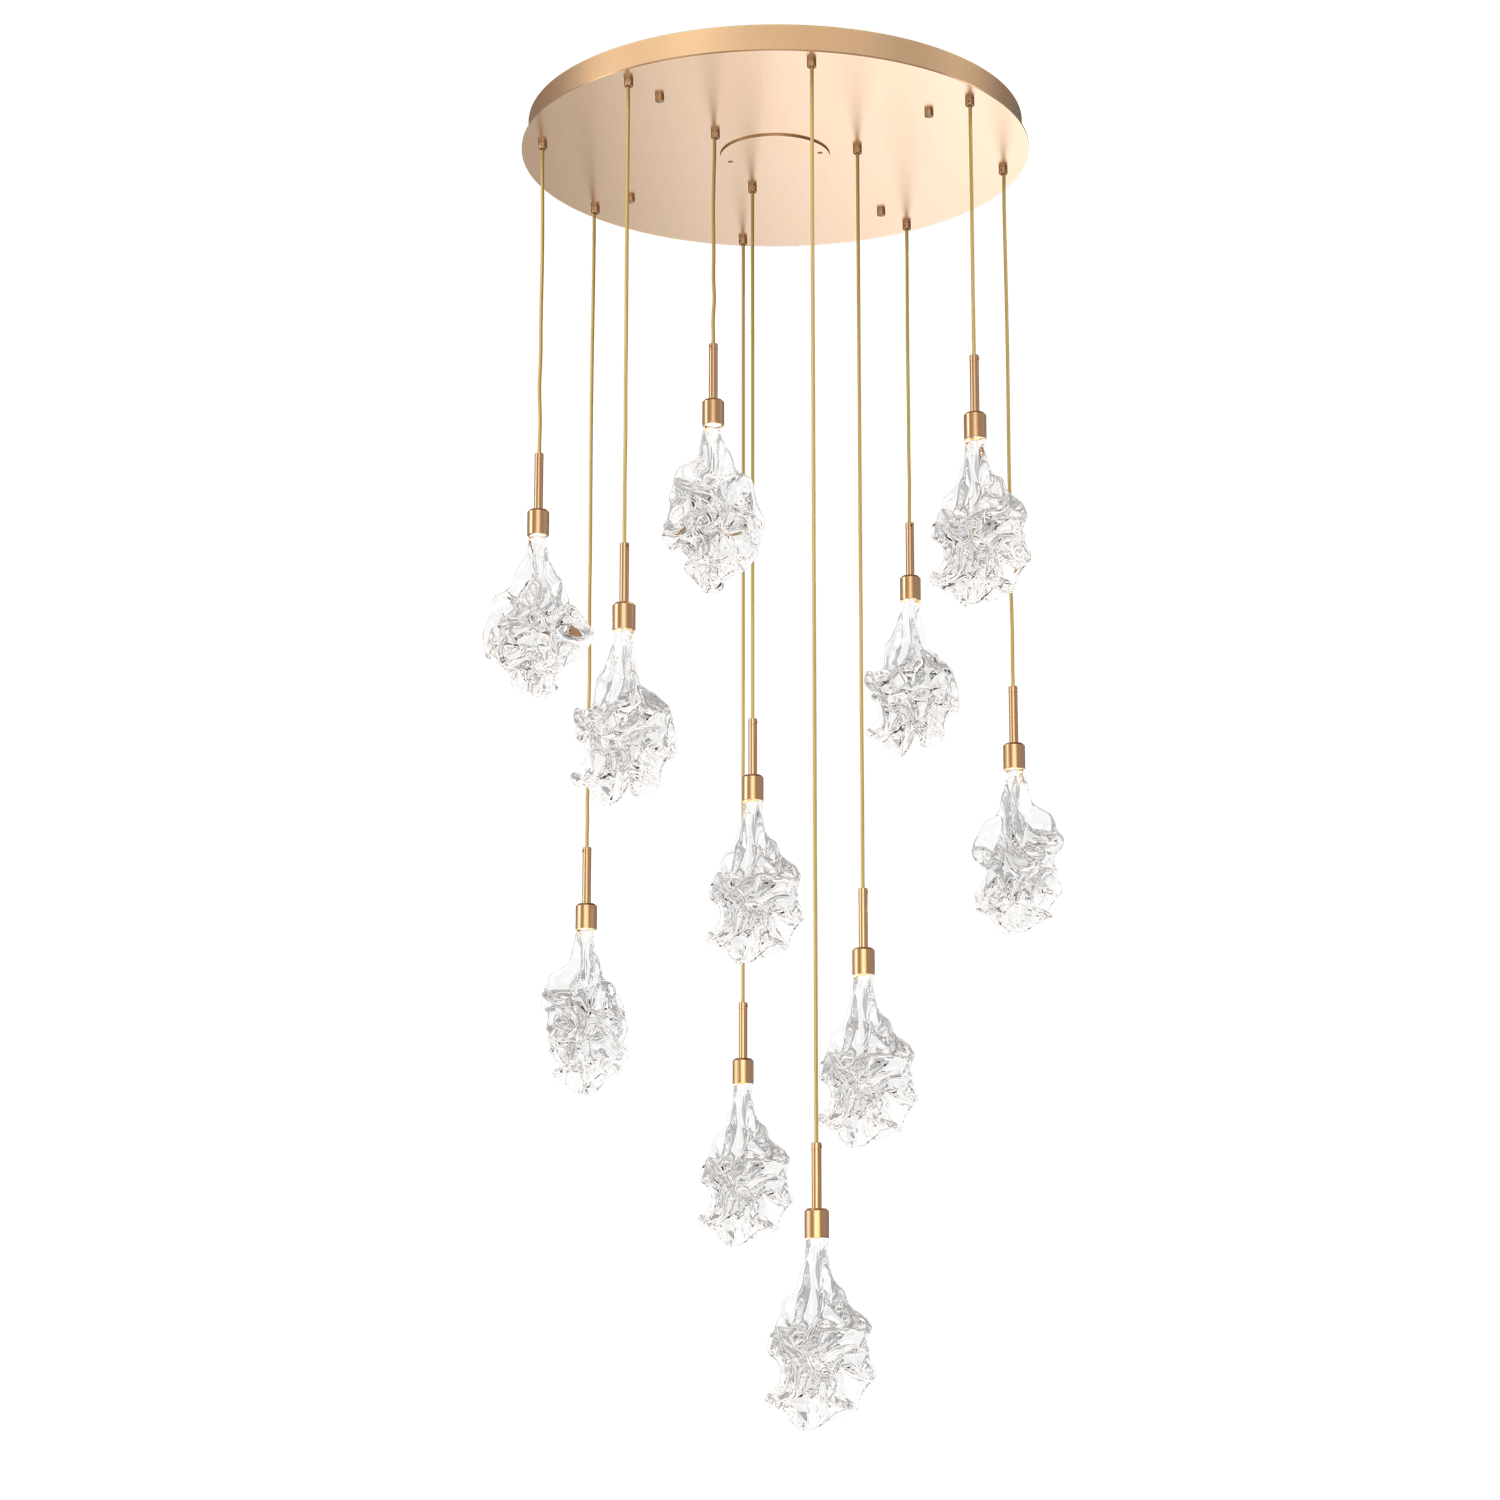 CHB0059-11-NB-Hammerton-Studio-Blossom-11-light-round-pendant-chandelier-with-novel-brass-finish-and-clear-handblown-crystal-glass-shades-and-LED-lamping